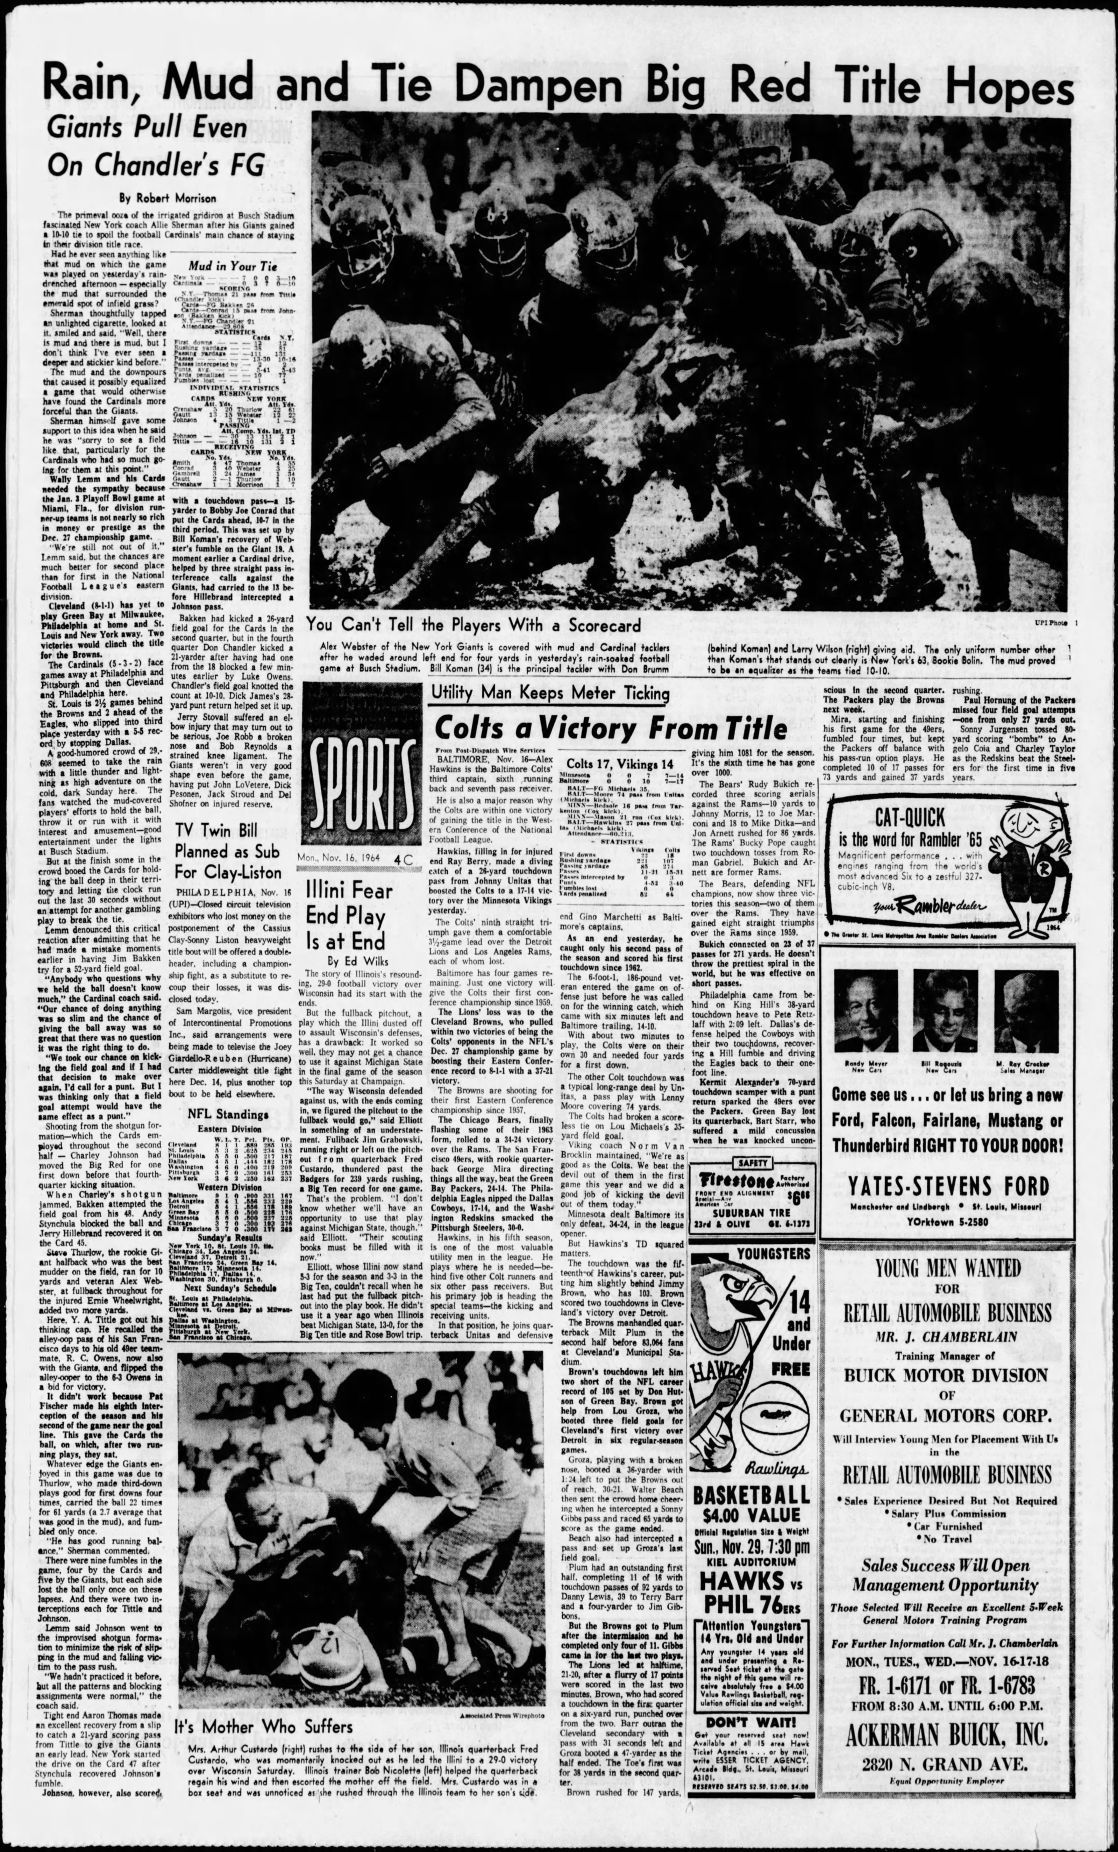 Time machine: 5 things we noticed from this Nov. 16, 1964 Post-Dispatch sports front | Sports ...